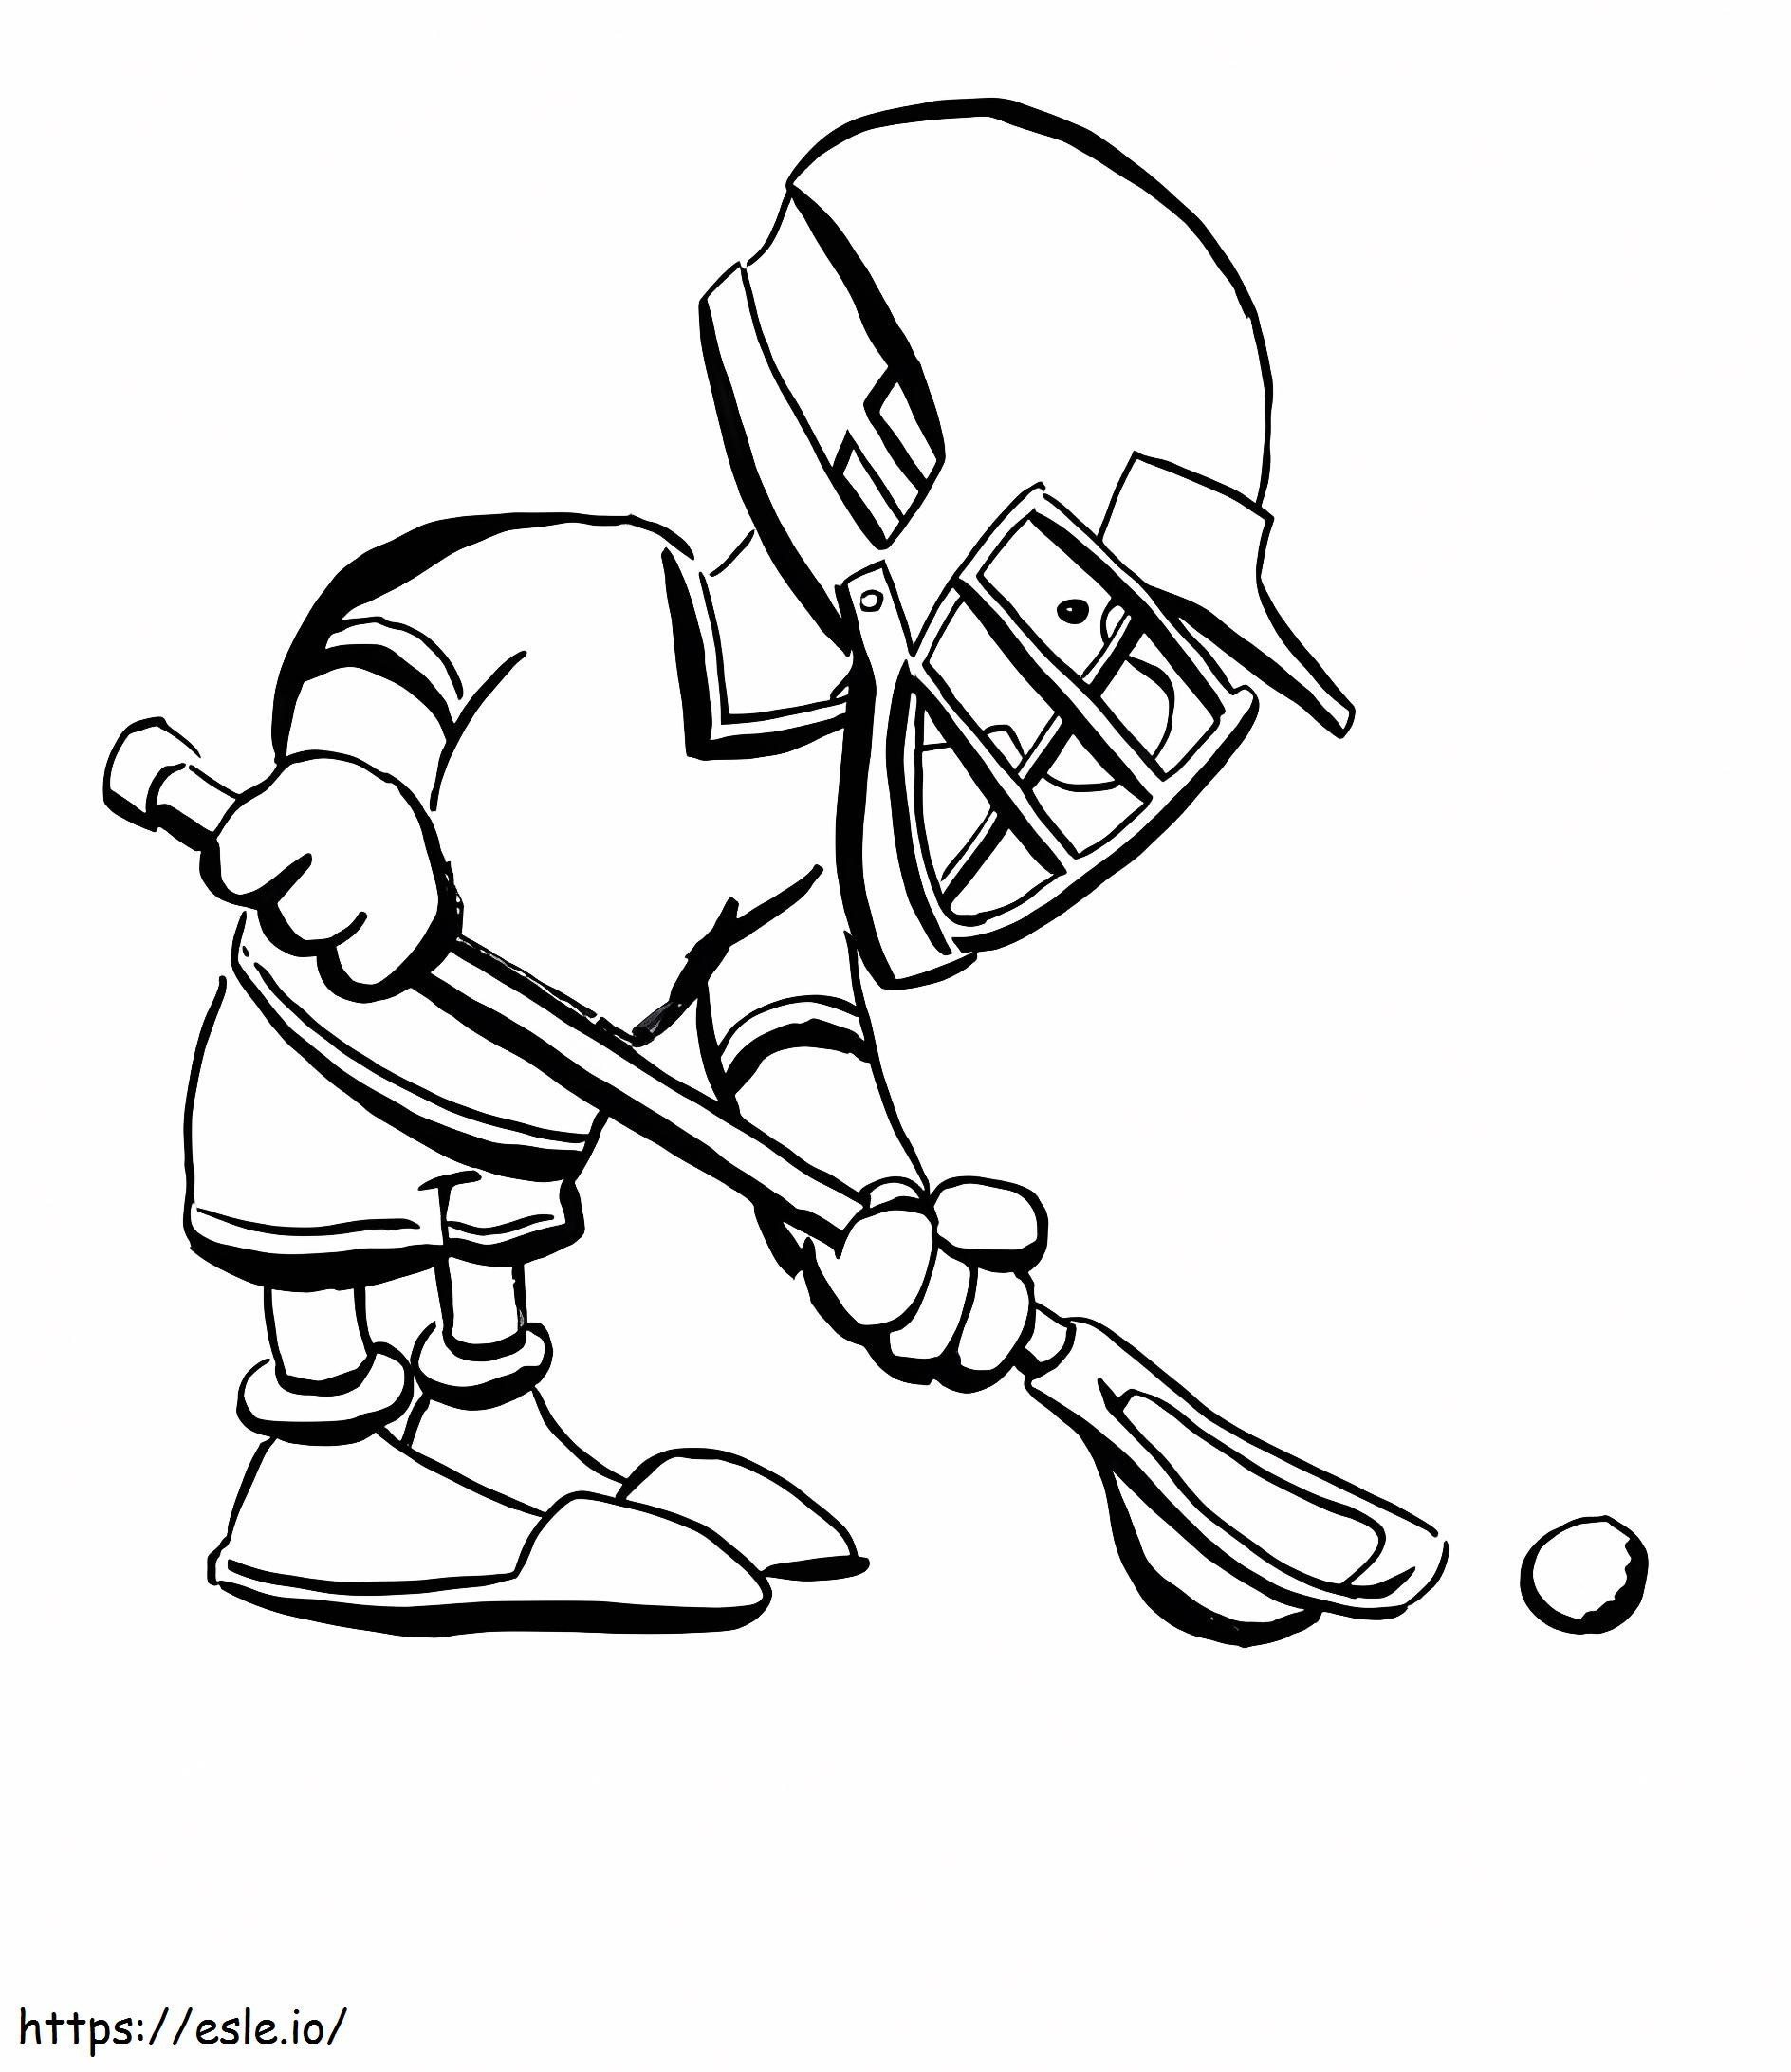 Little Boys Playing Lacrosse coloring page